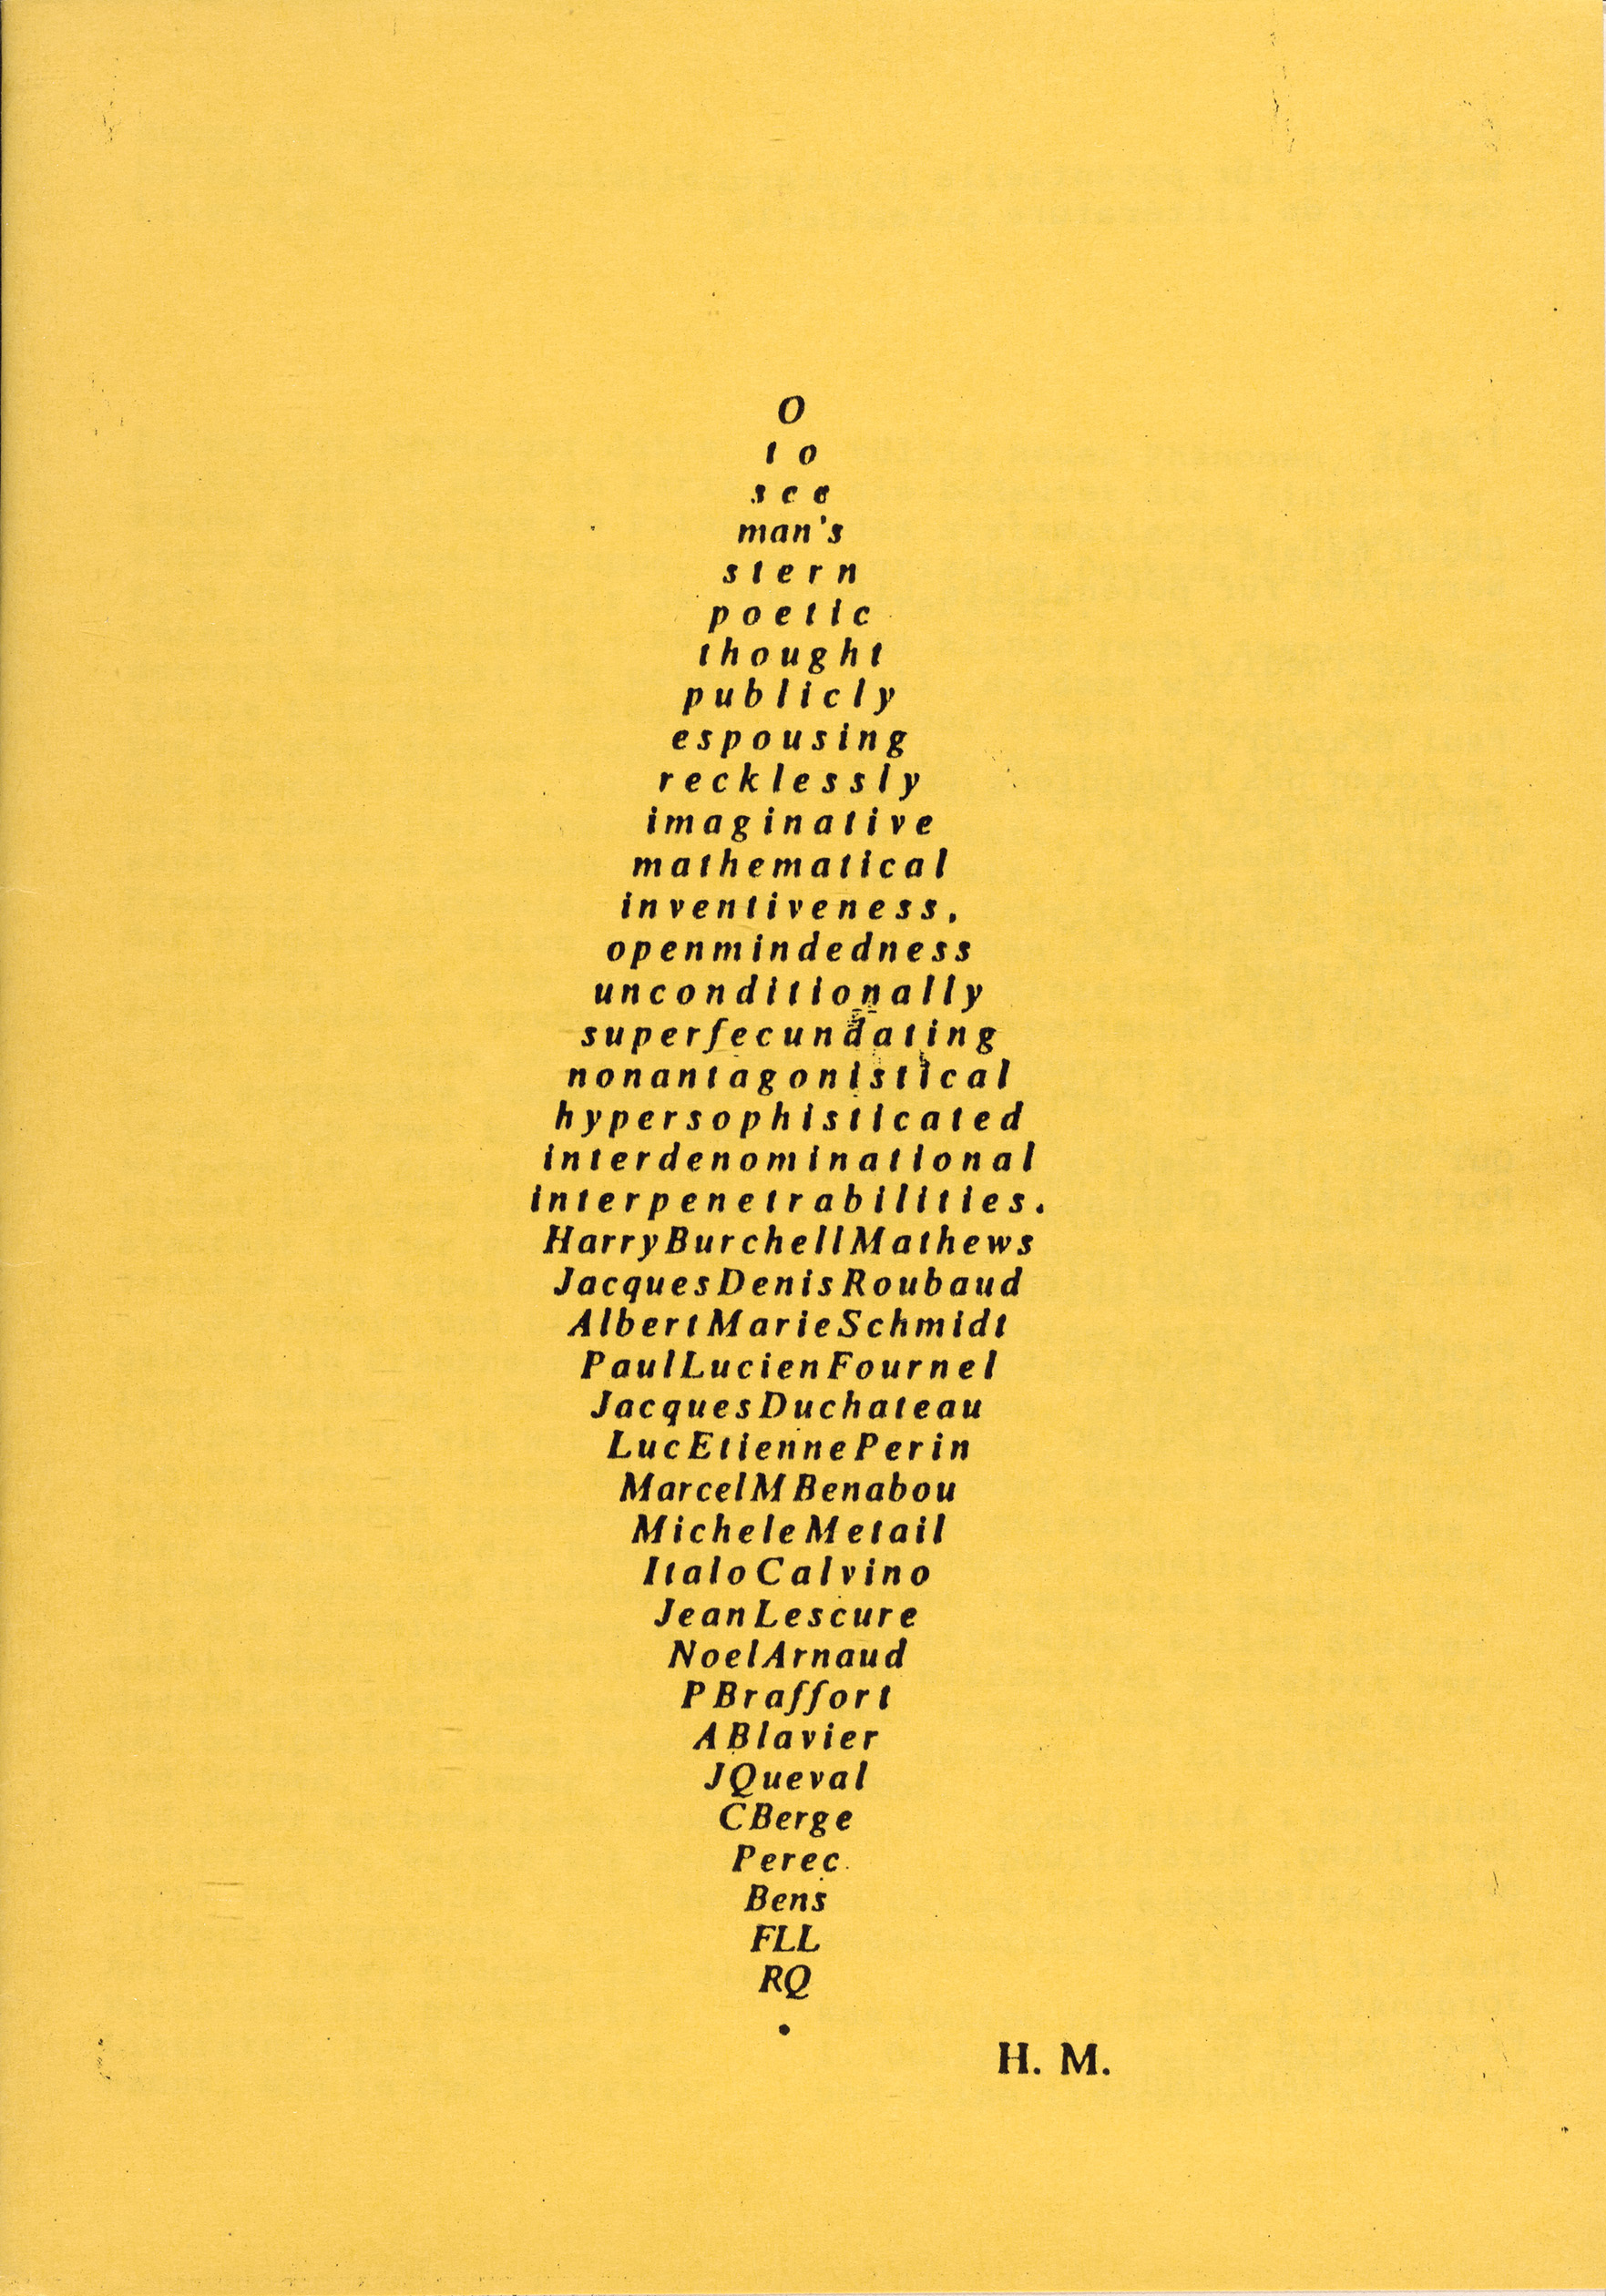 Cover of program for Week-end Oulipo